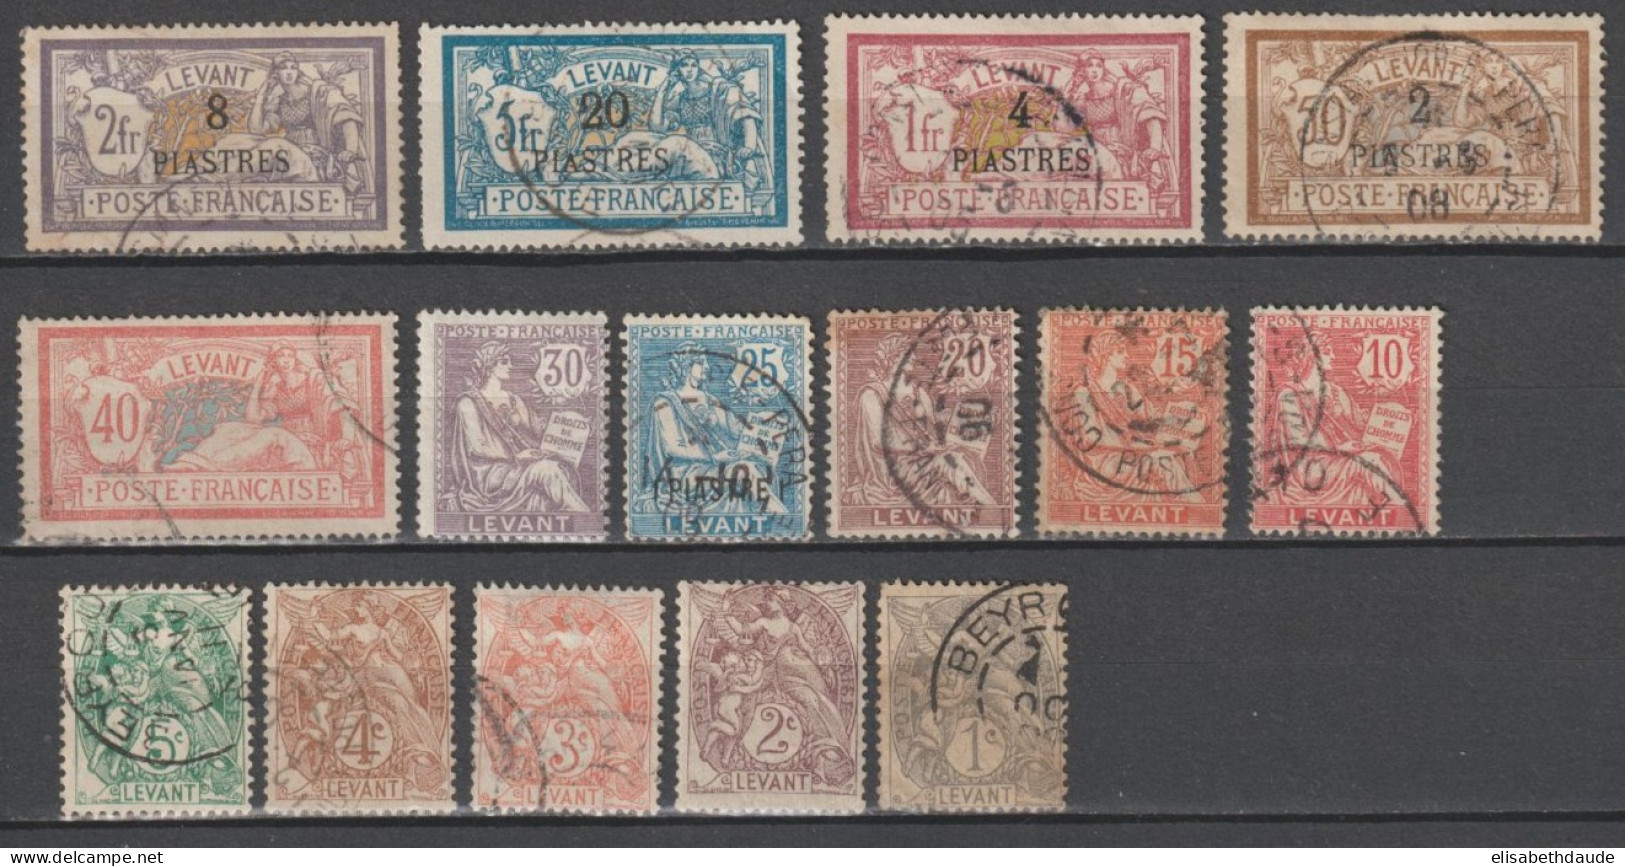 LEVANT - 1902 - SERIE COMPLETE YVERT 9/23 OBLITERE (2 TIMBRES * MH) - COTE = 57 EUR - Used Stamps